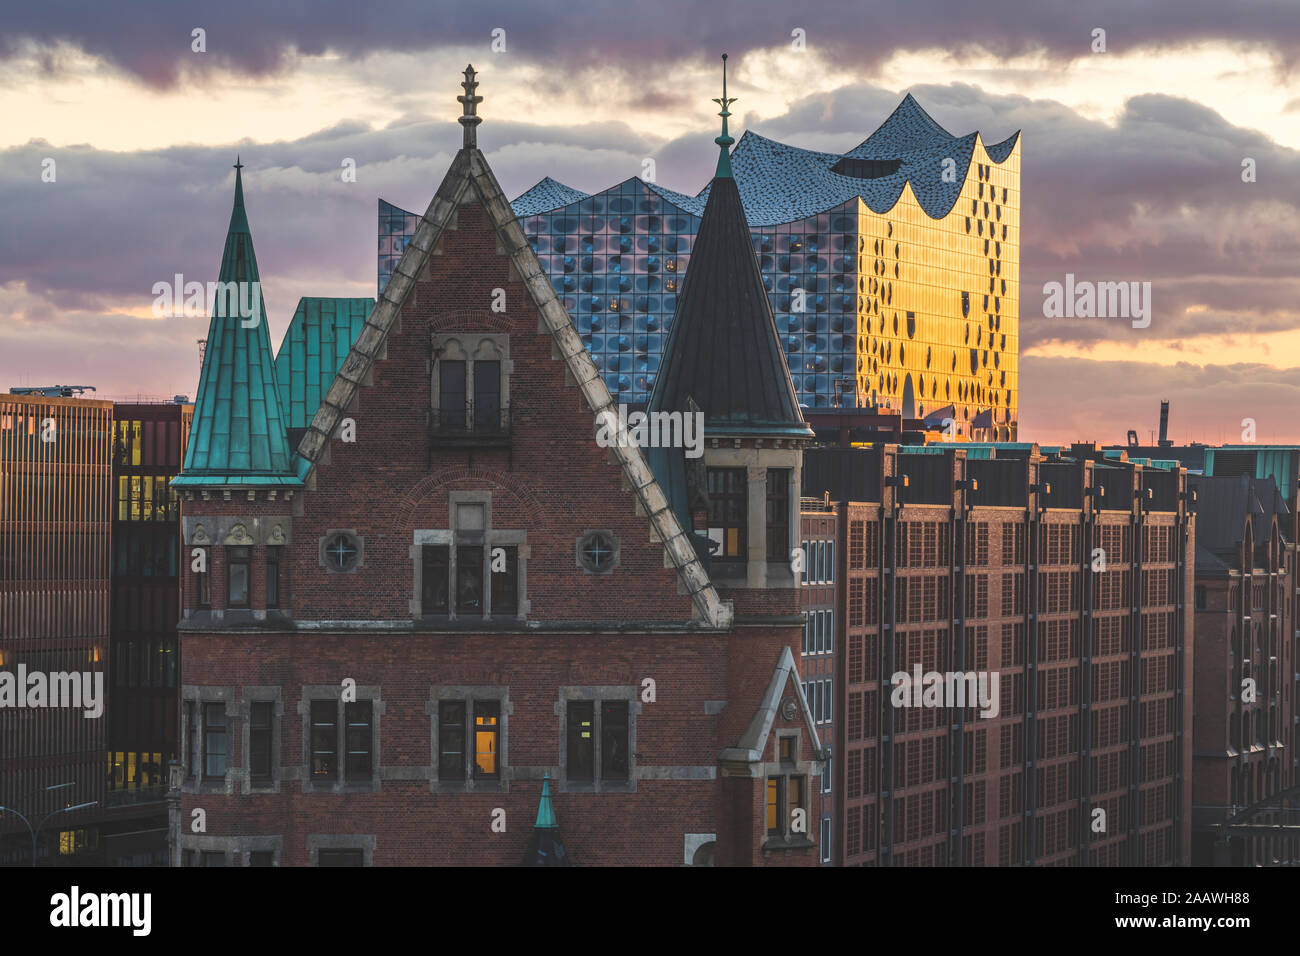 View of Elbphilharmonie and Speicherstadt against cloudy sky during sunset in Hamburg, Germany Stock Photo